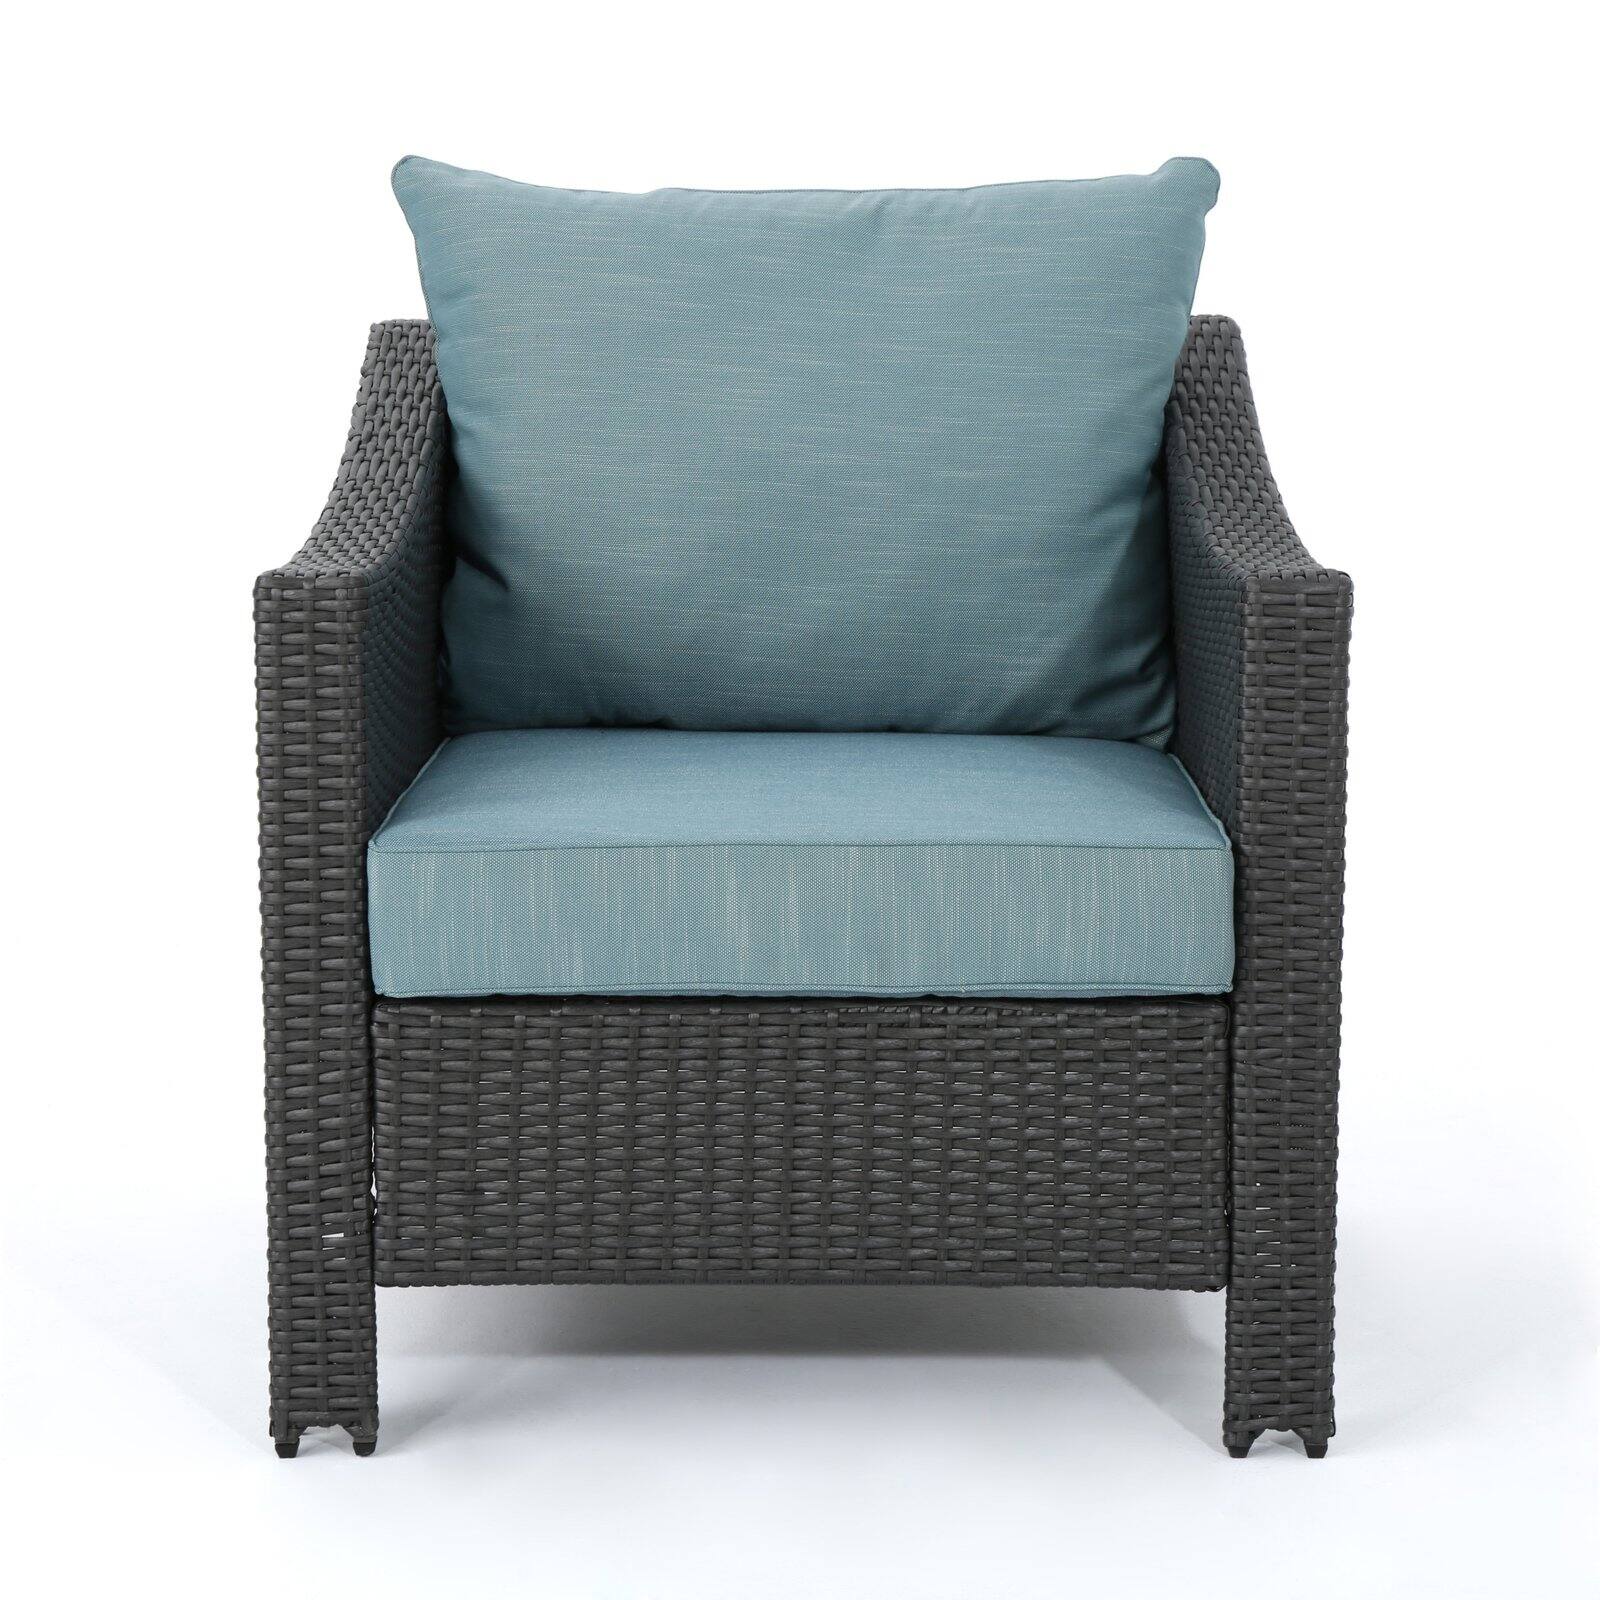 Antibes Wicker 3 Piece Lounge Chair Chat Set - image 2 of 9